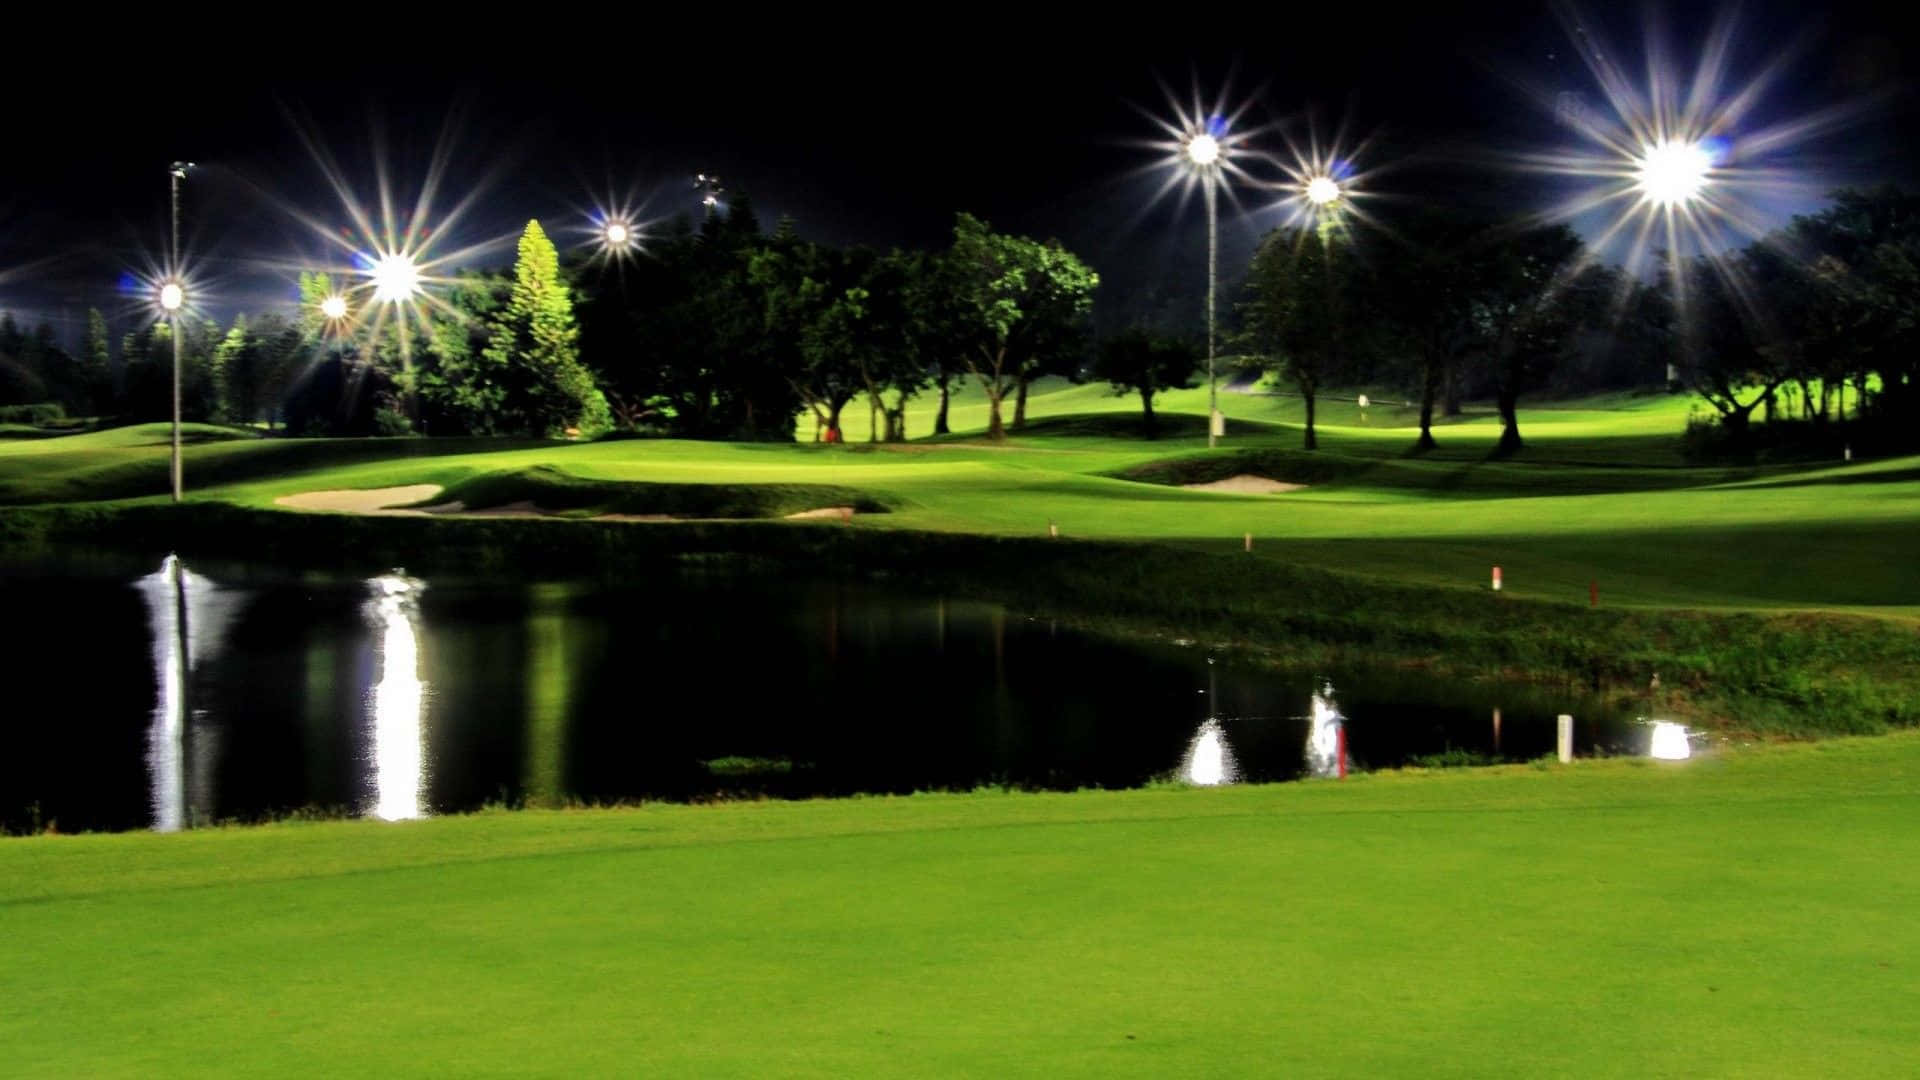 Get Ready To Tee Off On An Awesome Golf Course Wallpaper